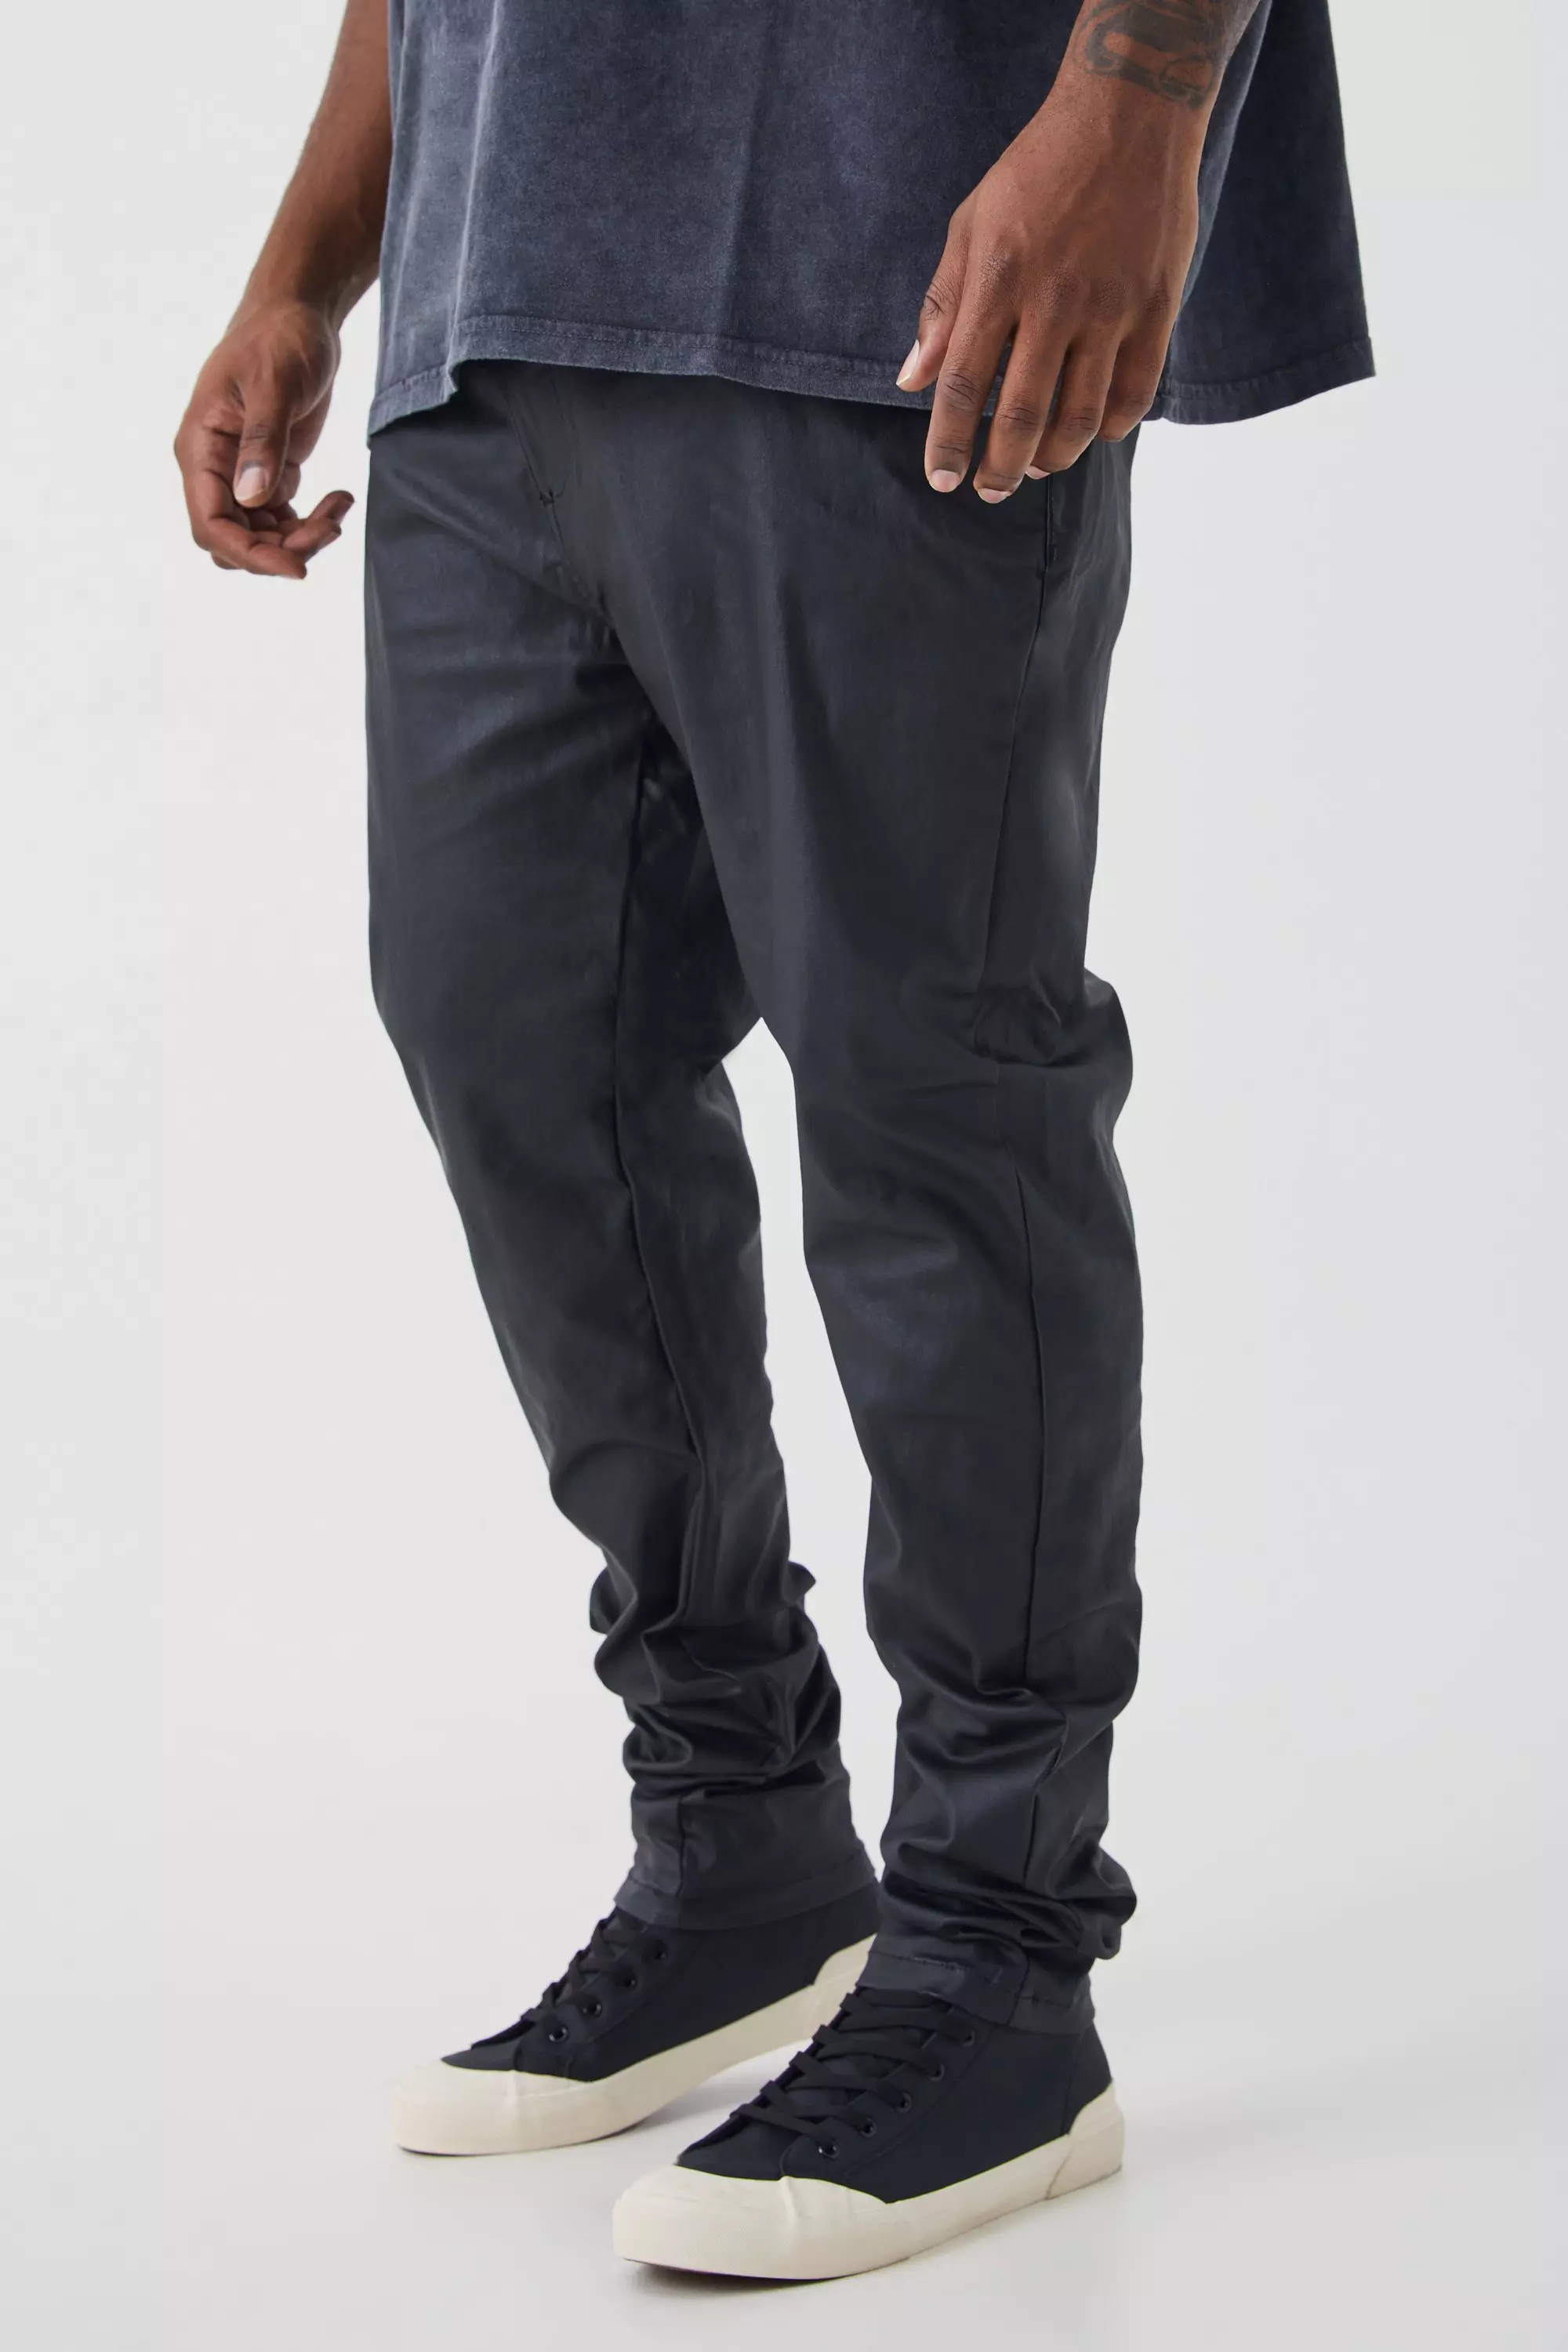 Plus Skinny Stacked Coated Twill Pants Black